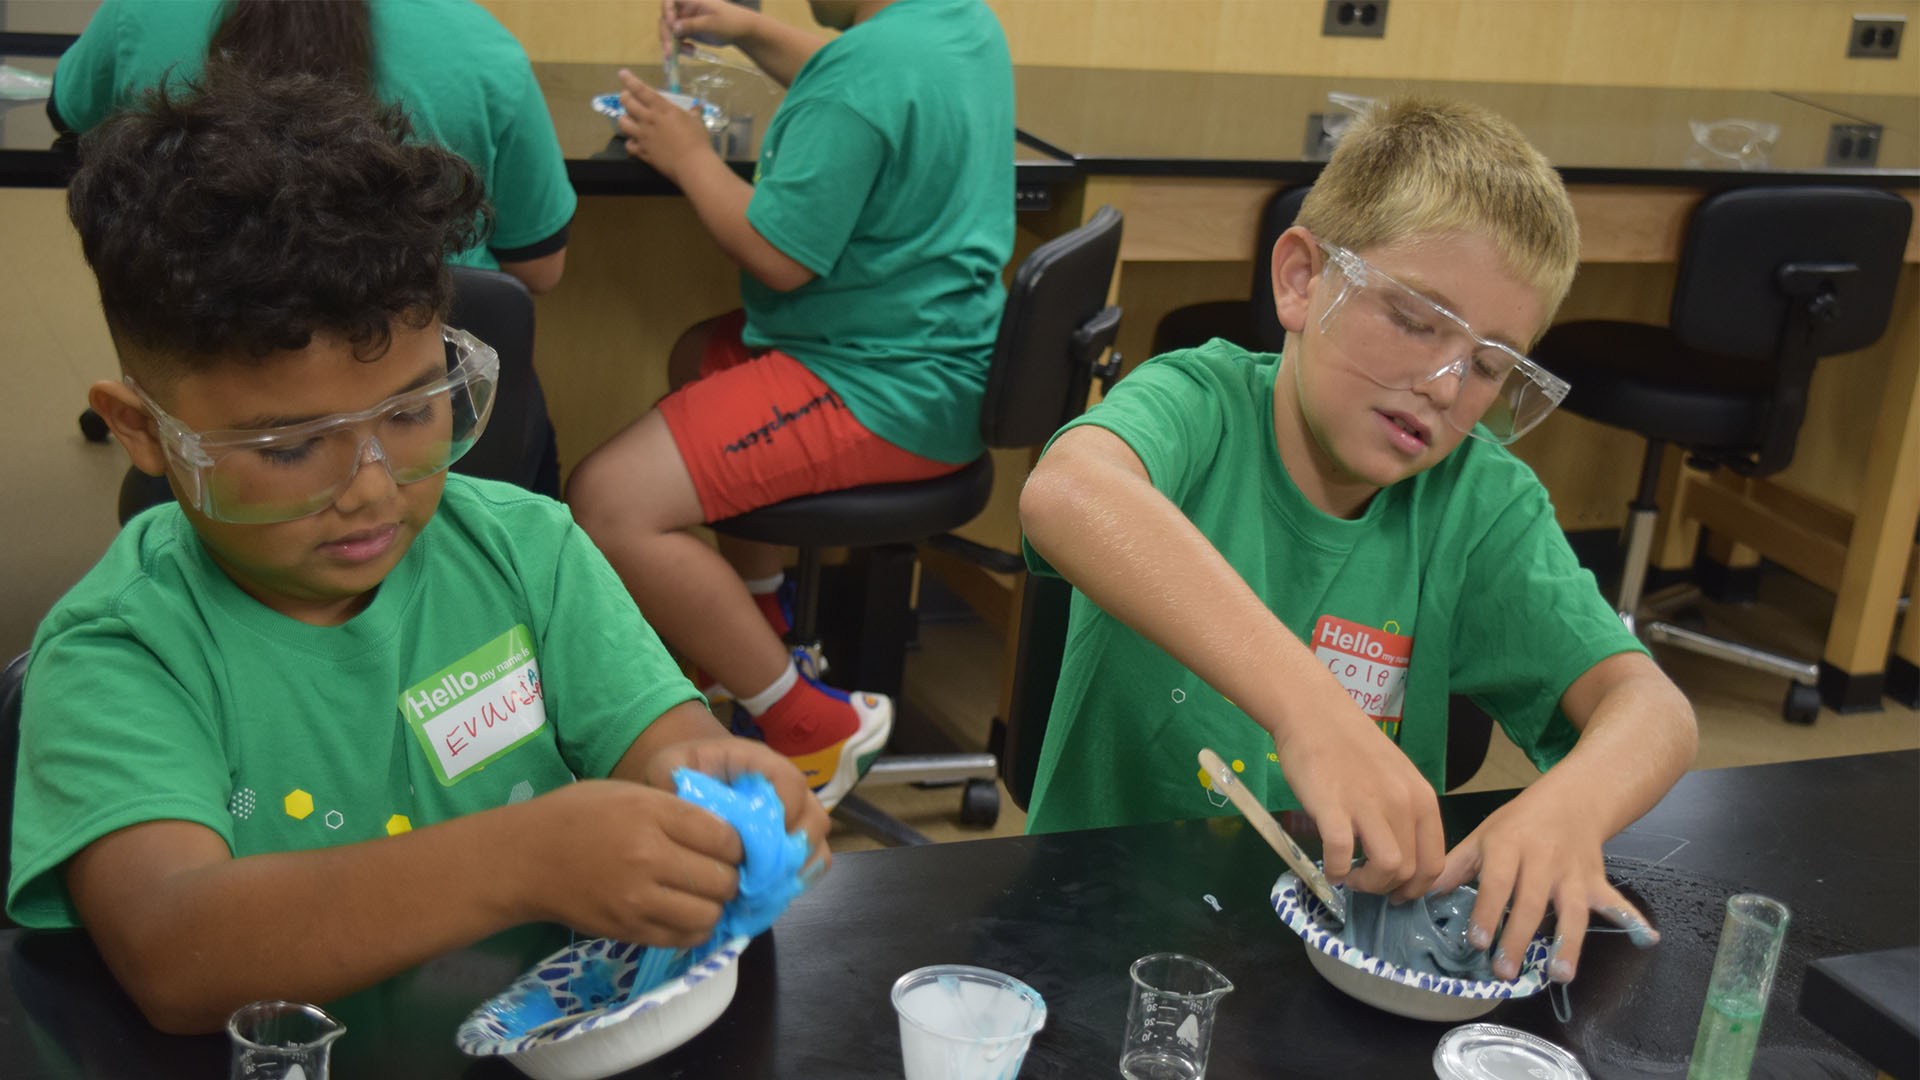 Students in STEM Camp learn as they experiment.